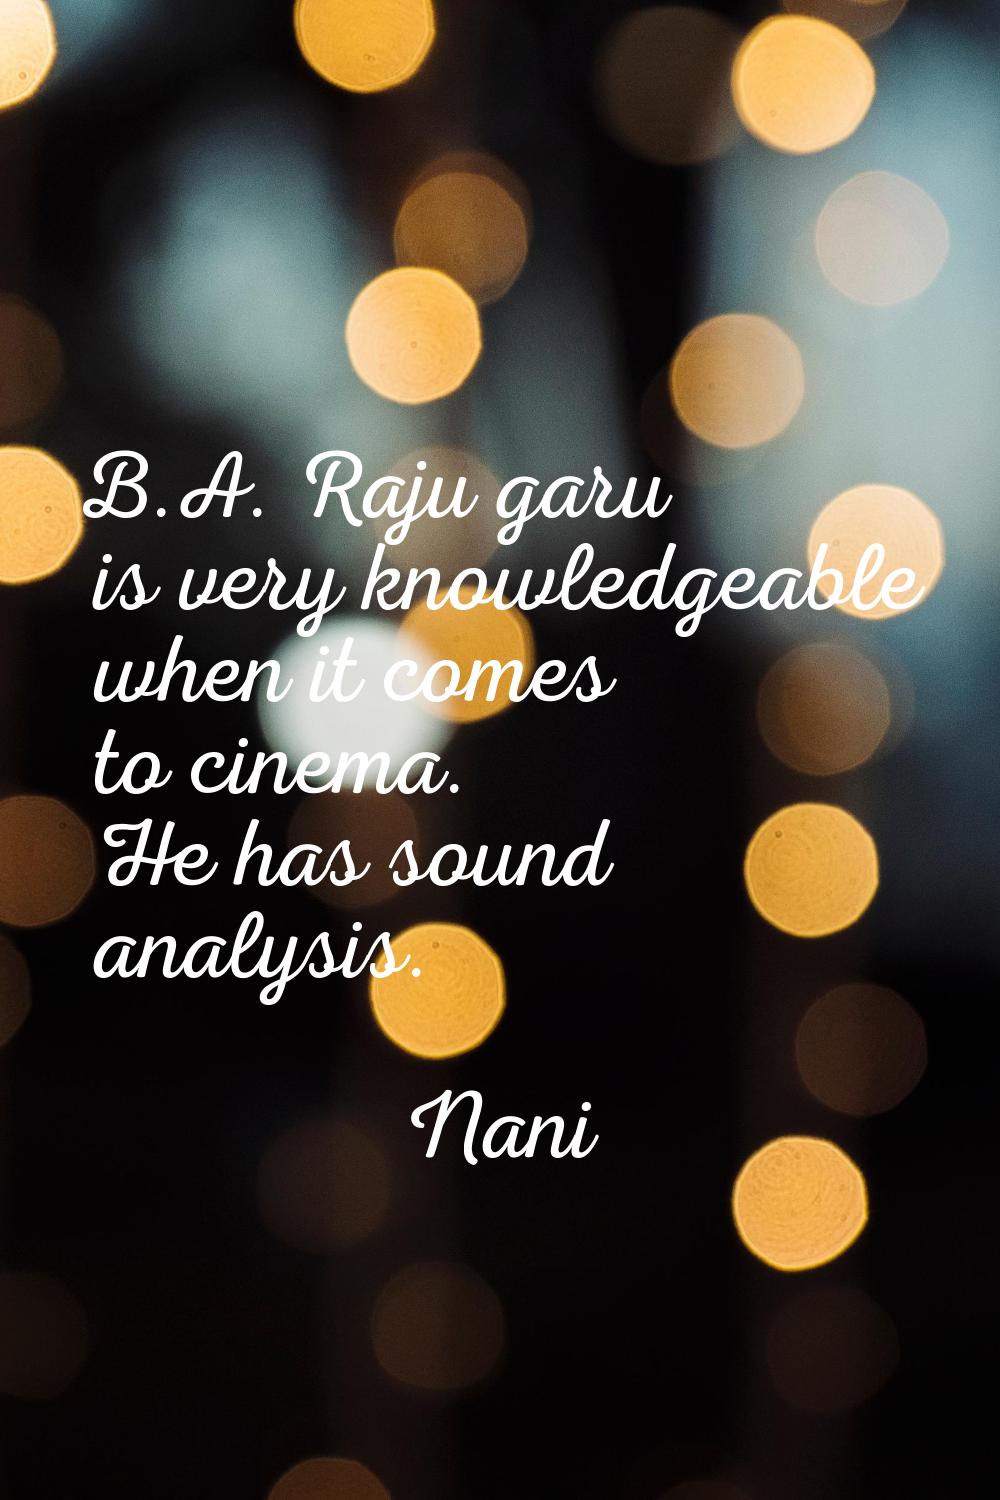 B.A. Raju garu is very knowledgeable when it comes to cinema. He has sound analysis.